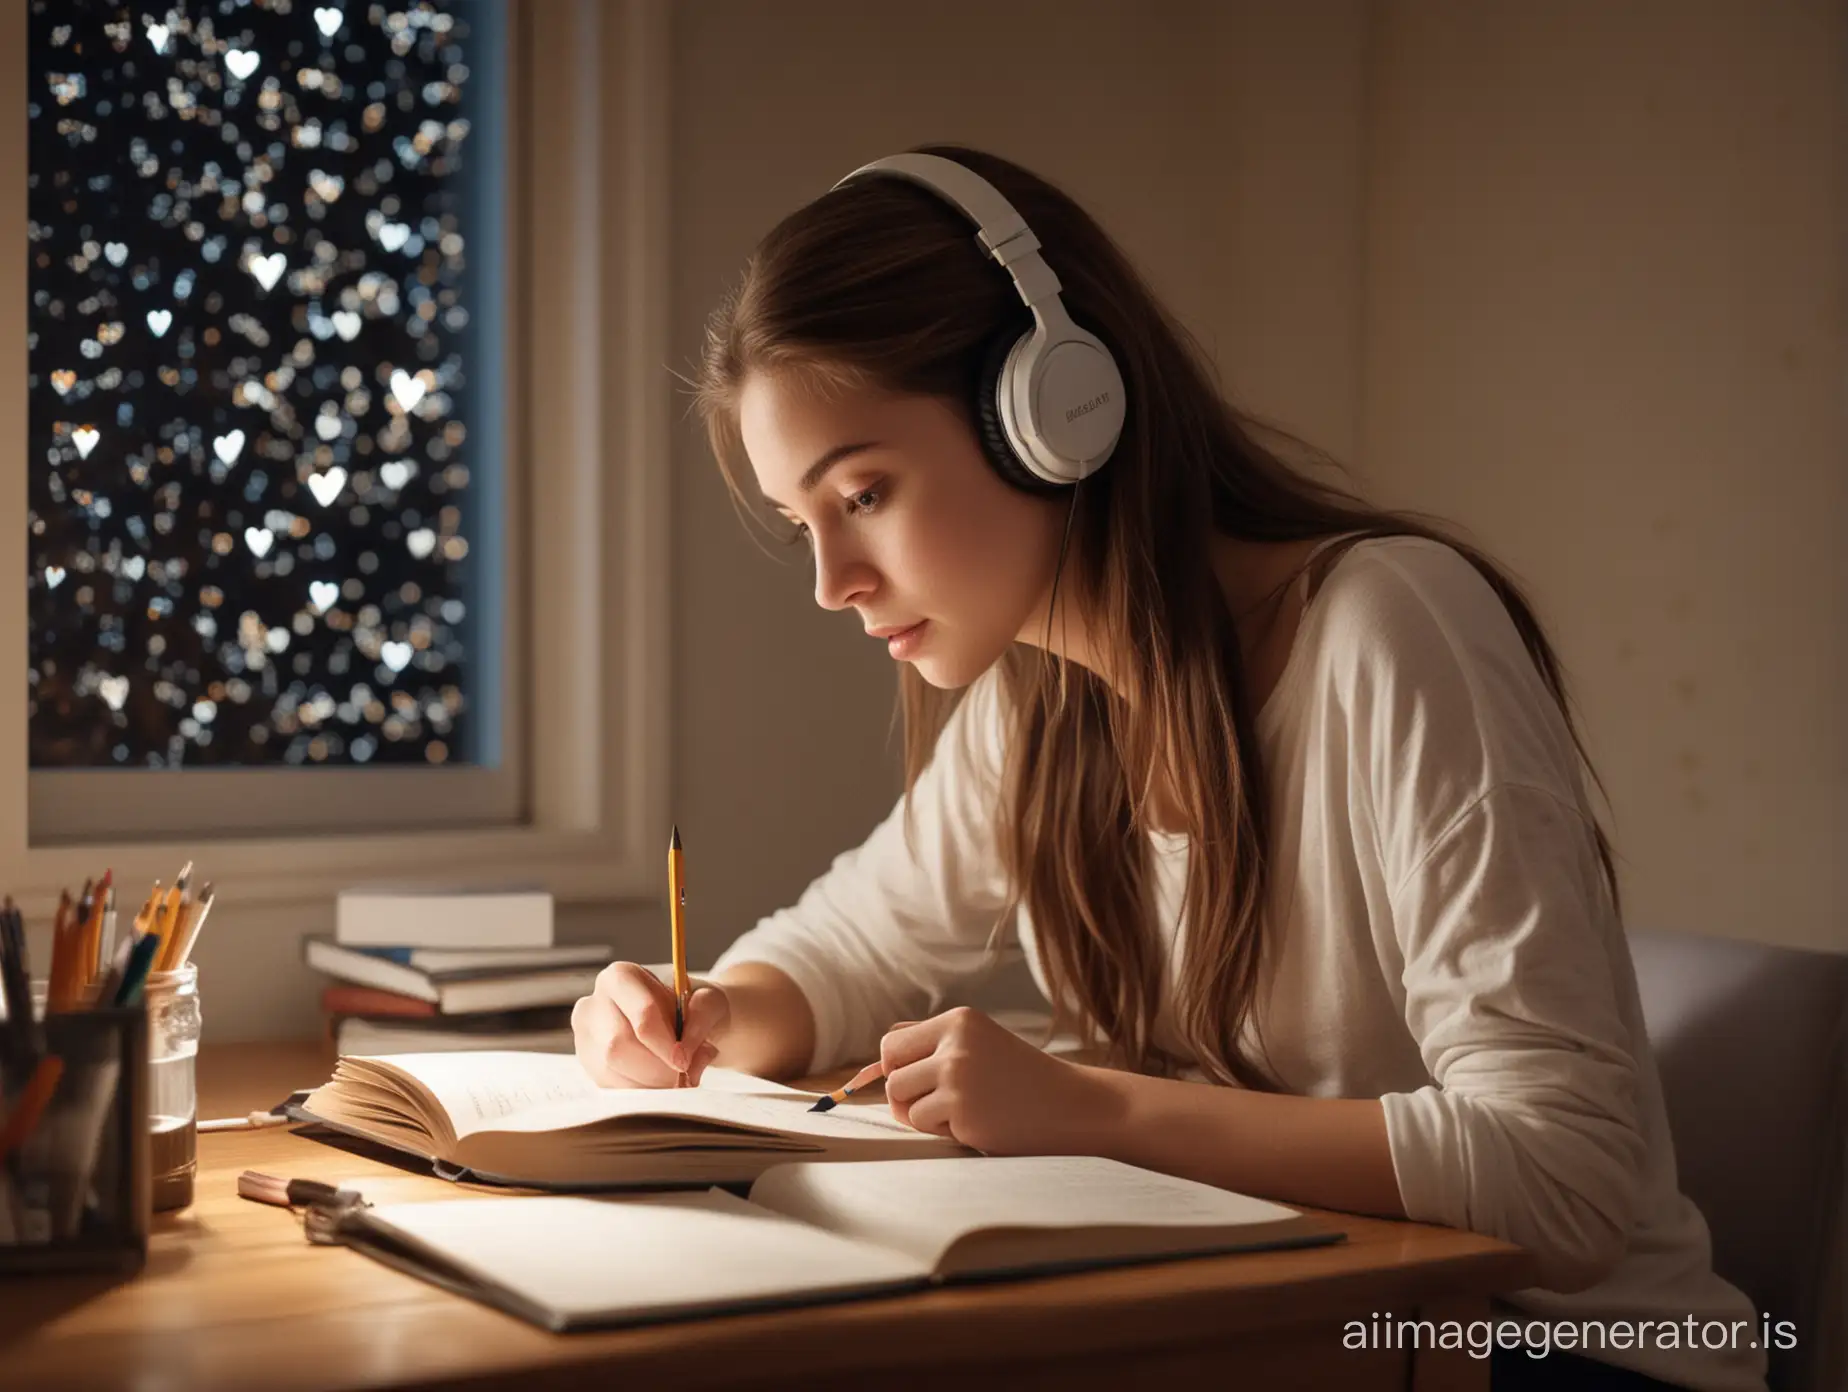 An 18-year-old woman with a heart-shaped face, blemish-free white skin, brown hair, and distinct features. She is studying alone in her room, taking notes in a book. The room is calm and has lighting, and the stars twinkle outside the window. You can see her side profile. The night view is shining outside the window. There is a pencil holder for writing utensils in front of her. She wears headphones and listens to music. Her eyes are on the book. The room has a modern interior.